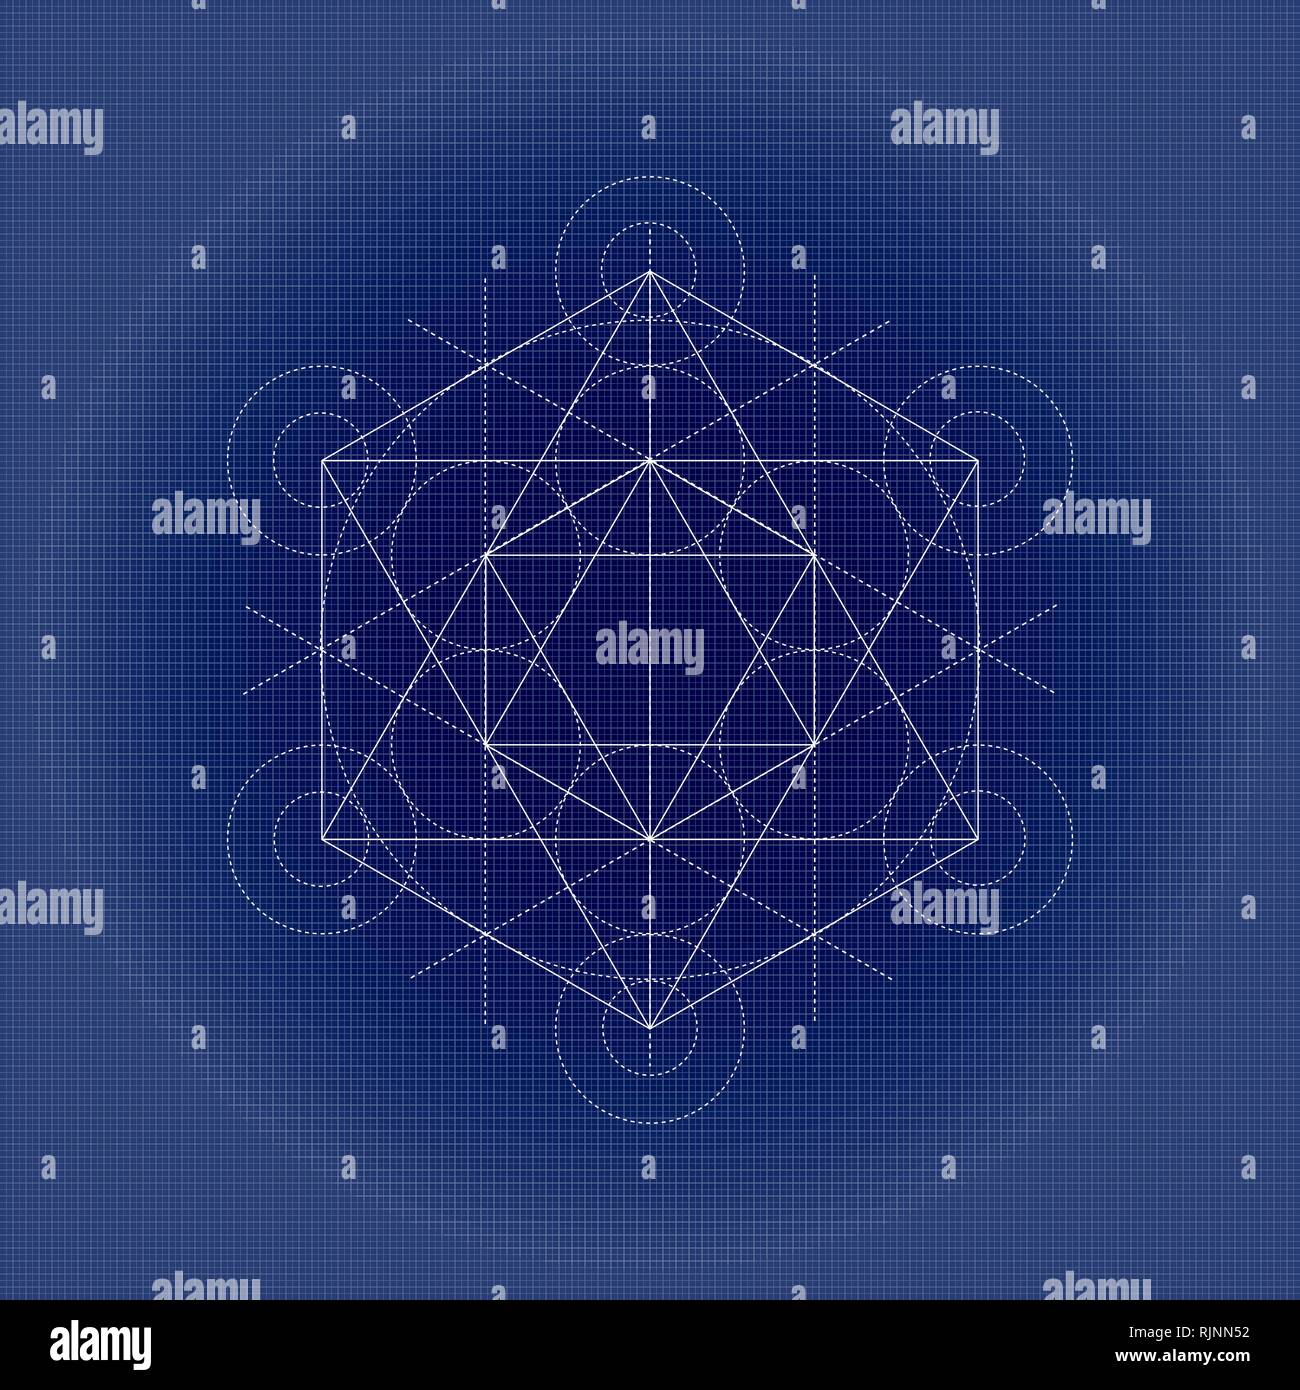 Metatrons cube, sacred geometry illustration on technical paper Stock Vector